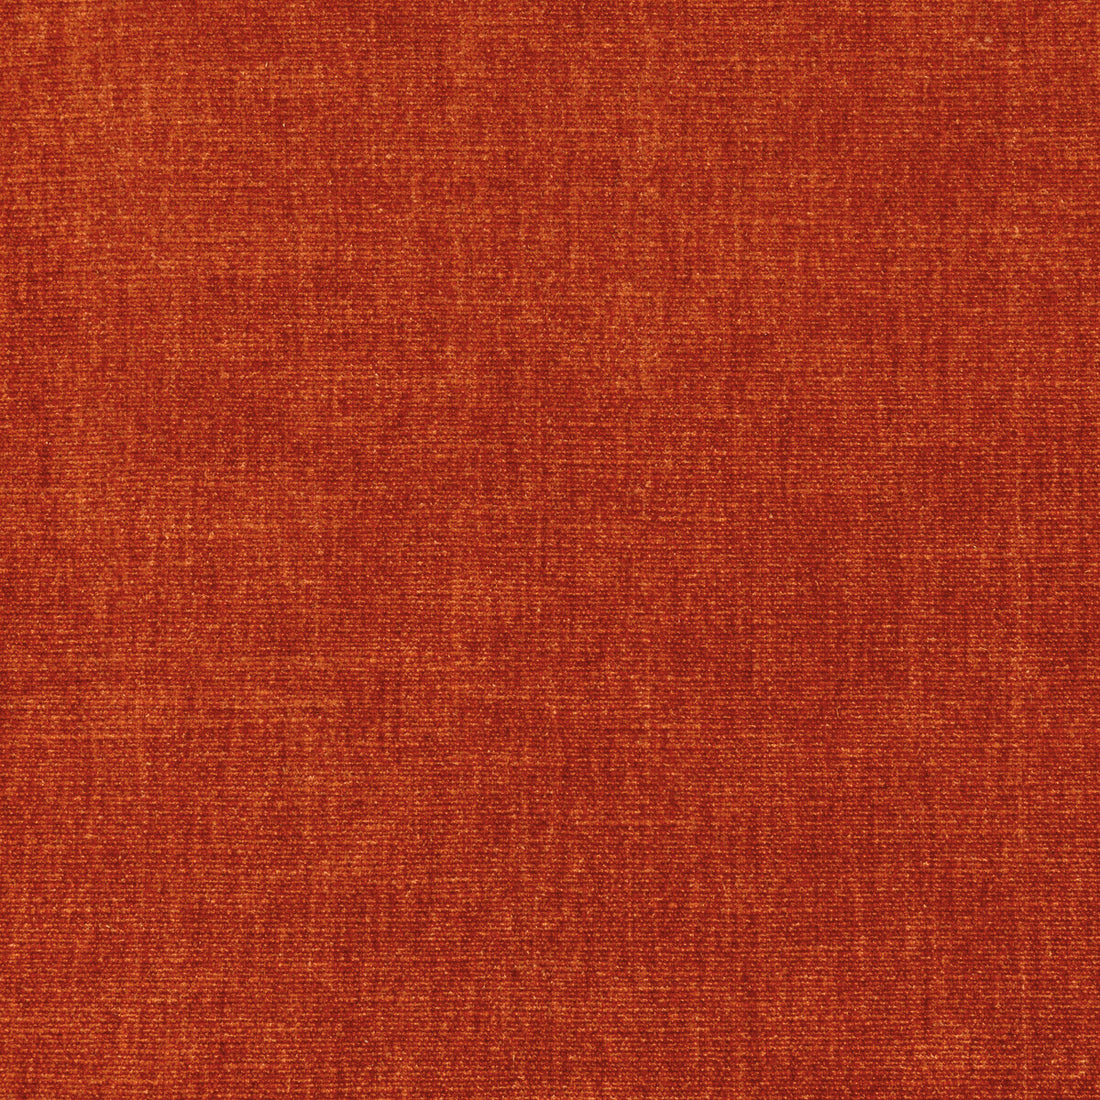 Kravet Smart fabric in 36076-12 color - pattern 36076.12.0 - by Kravet Smart in the Sumptuous Chenille II collection